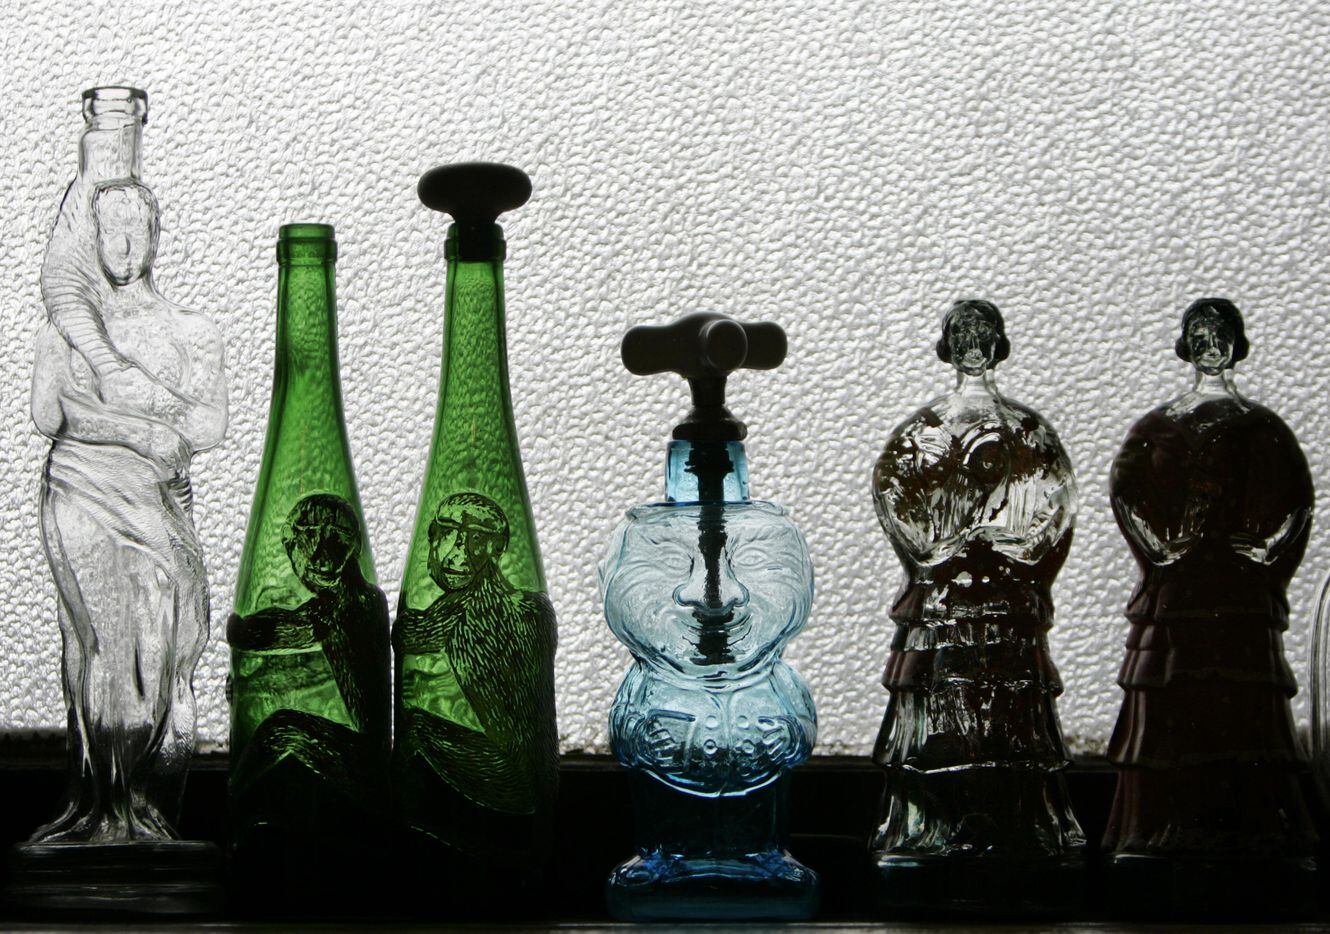 An eclectic collection of bottles lined the window in the kitchen of actress Ronnie Claire...